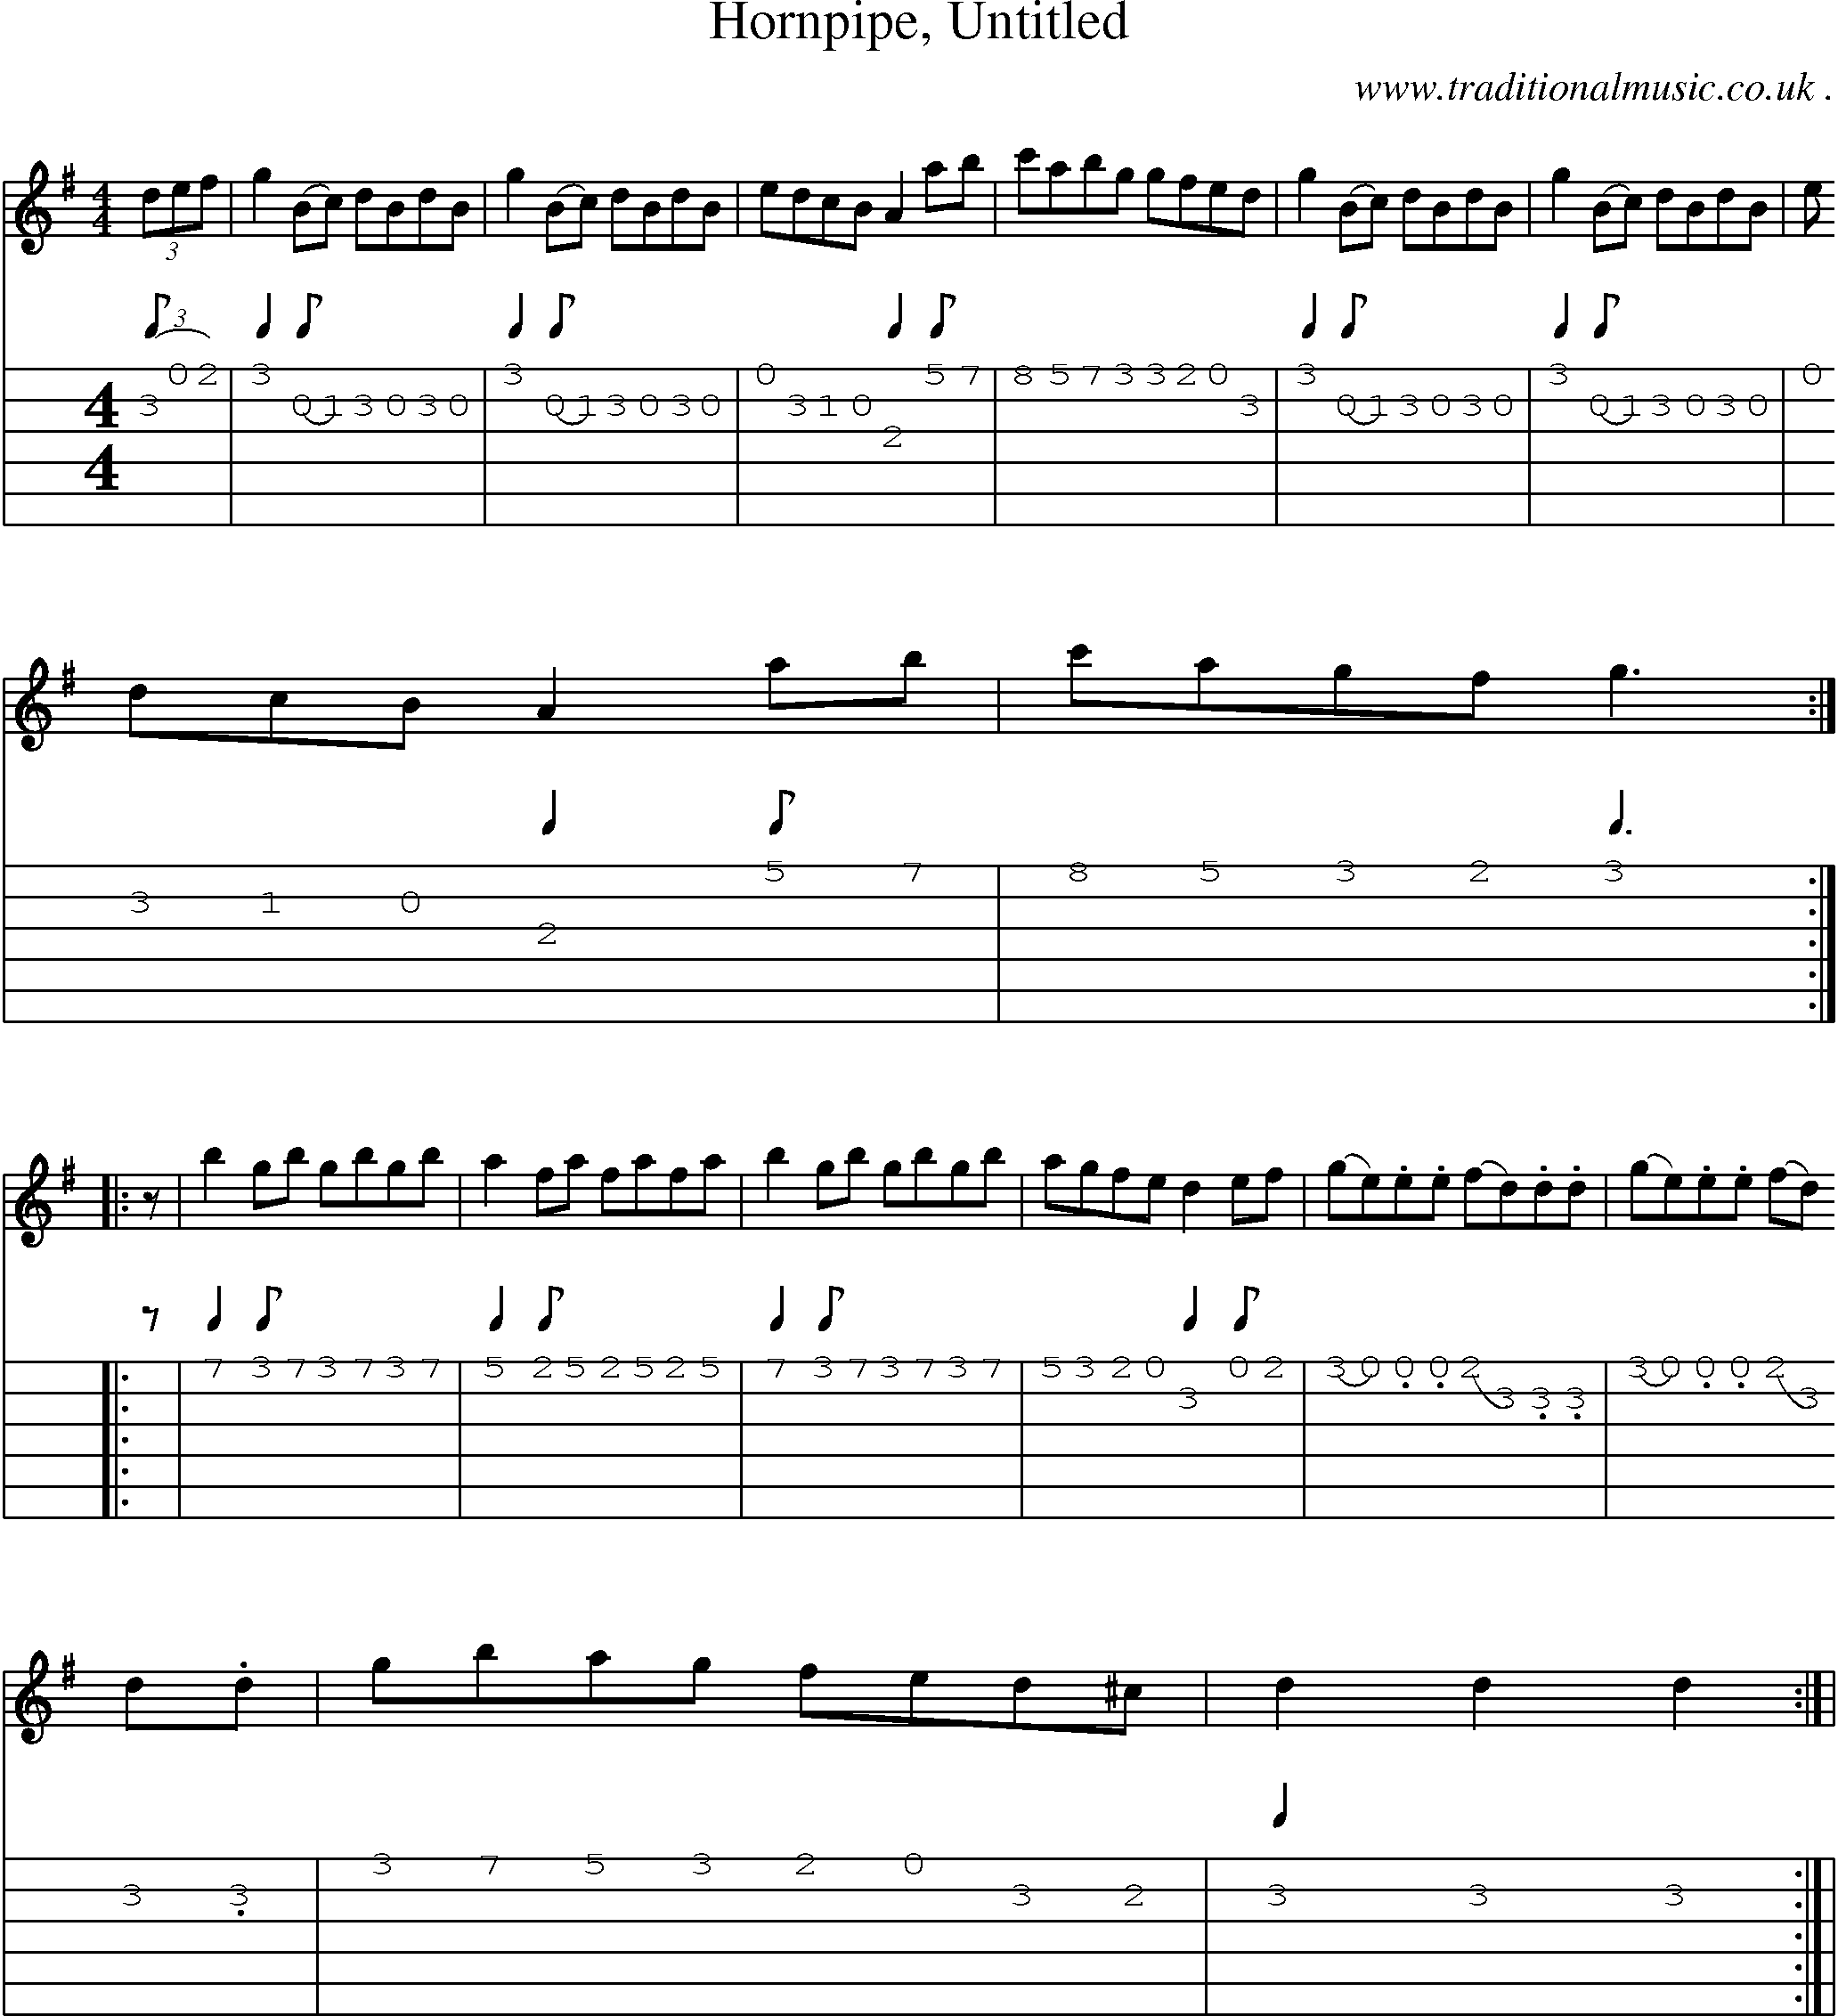 Sheet-Music and Guitar Tabs for Hornpipe Untitled